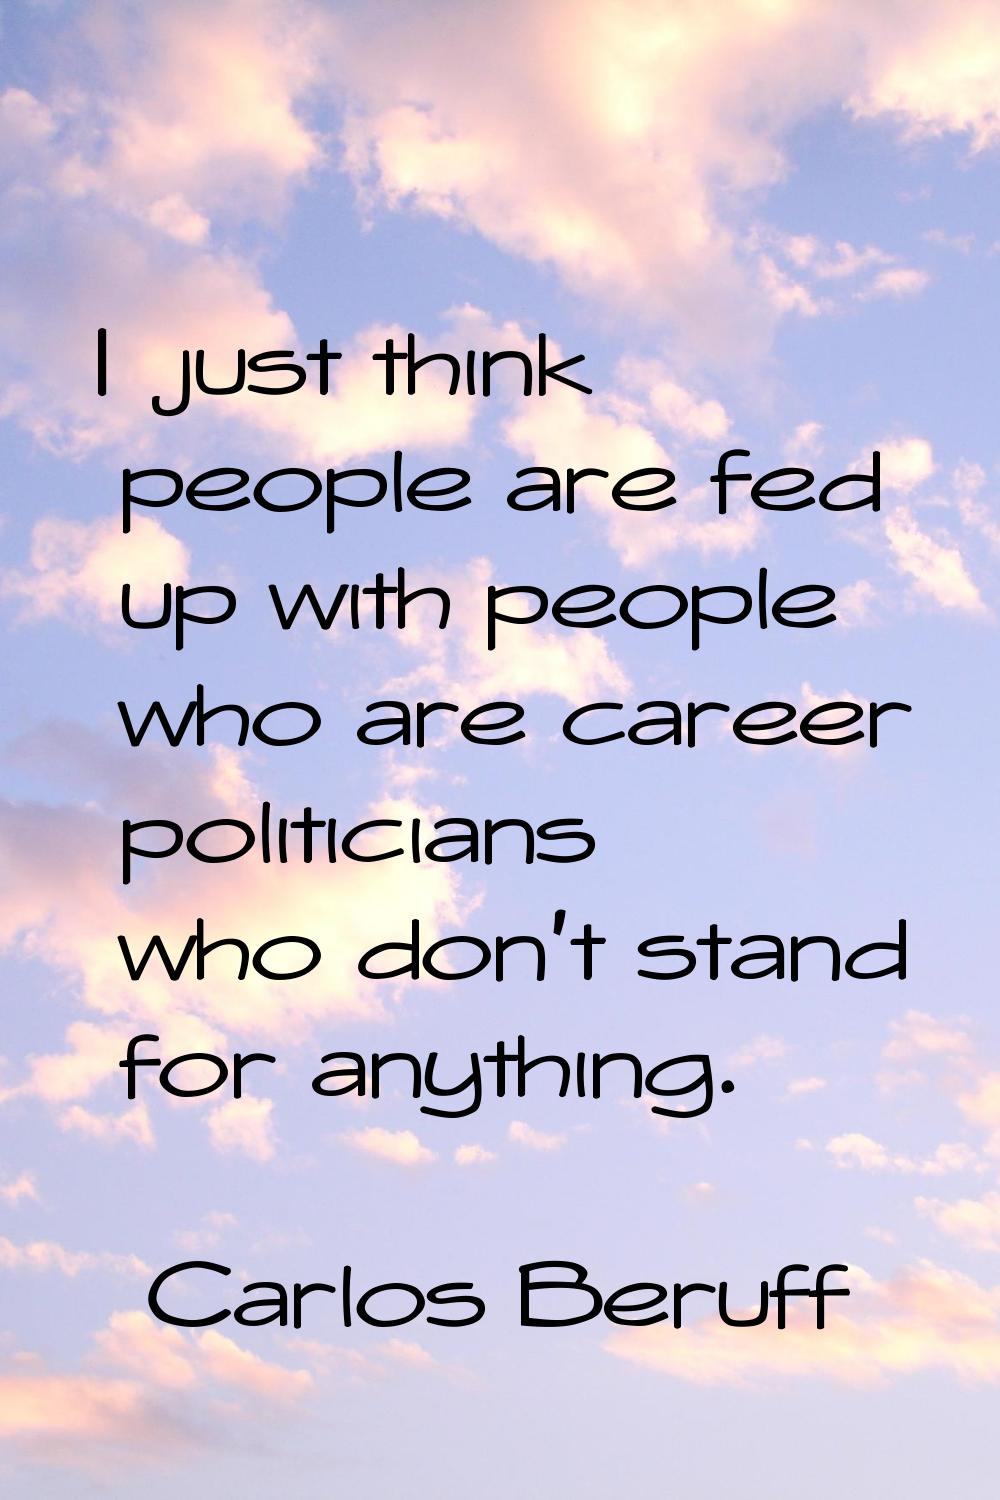 I just think people are fed up with people who are career politicians who don't stand for anything.